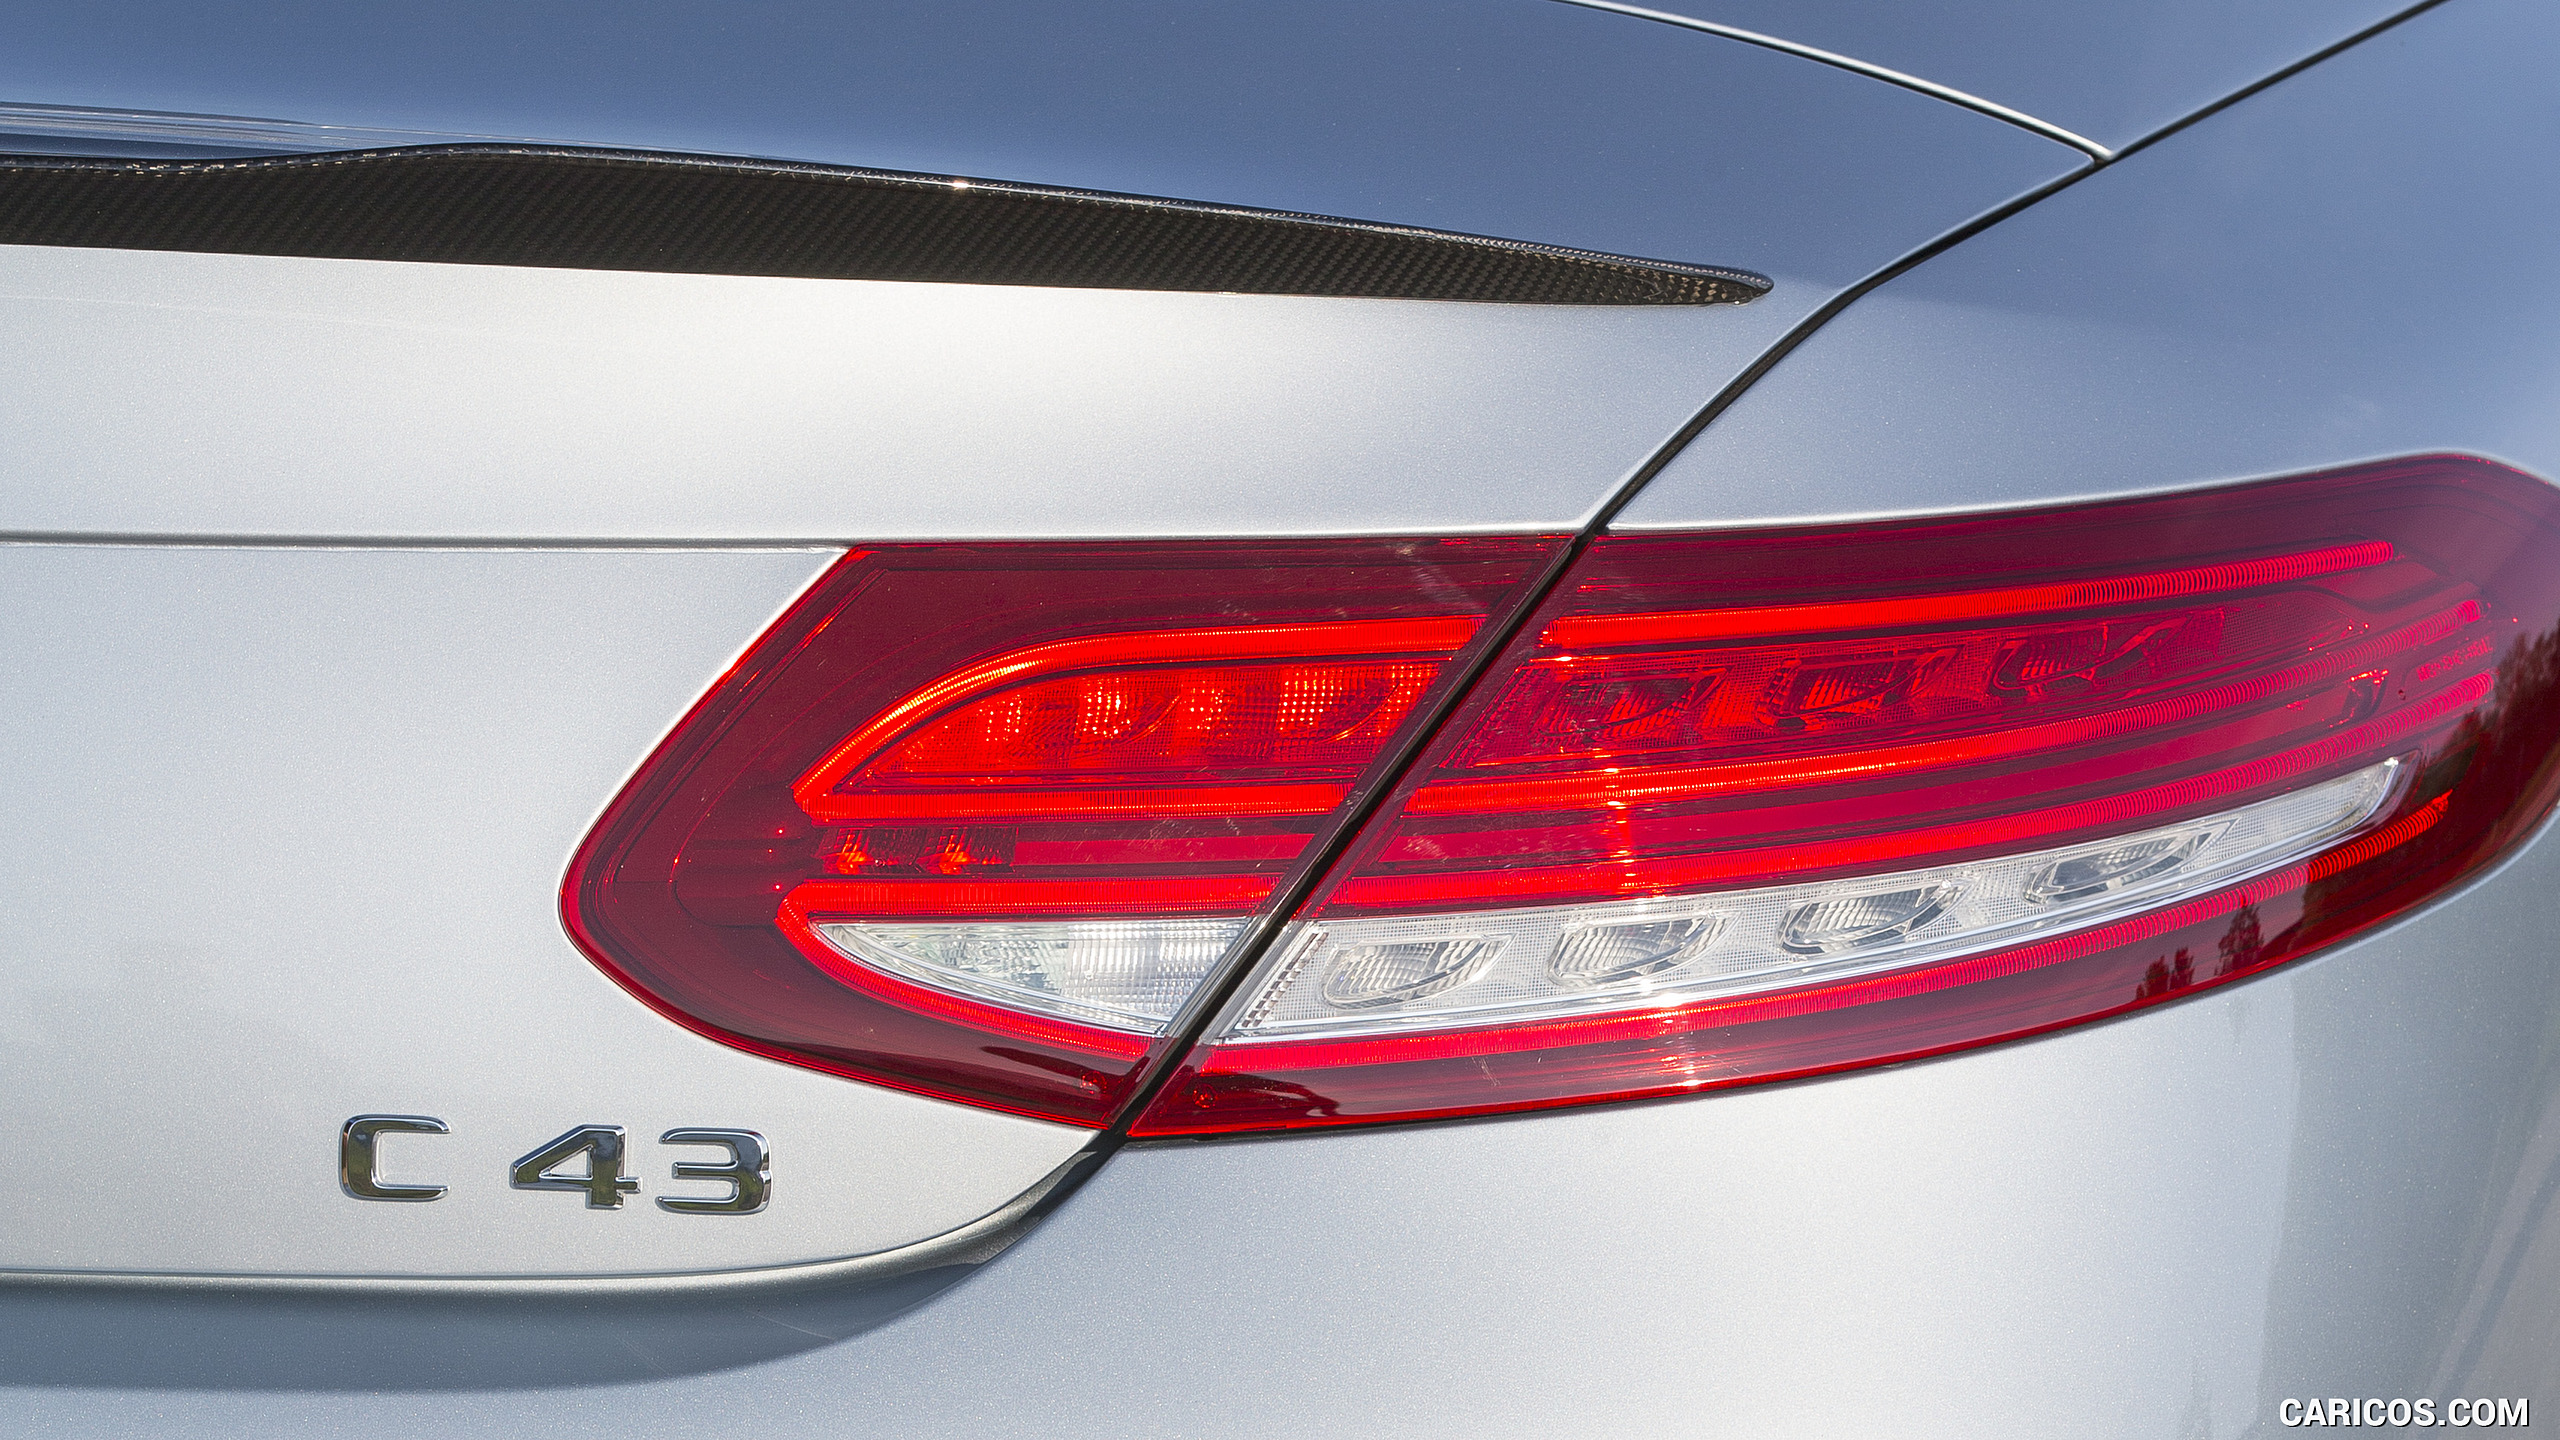 2017 Mercedes-AMG C43 Cabriolet - Tail Light, #77 of 97